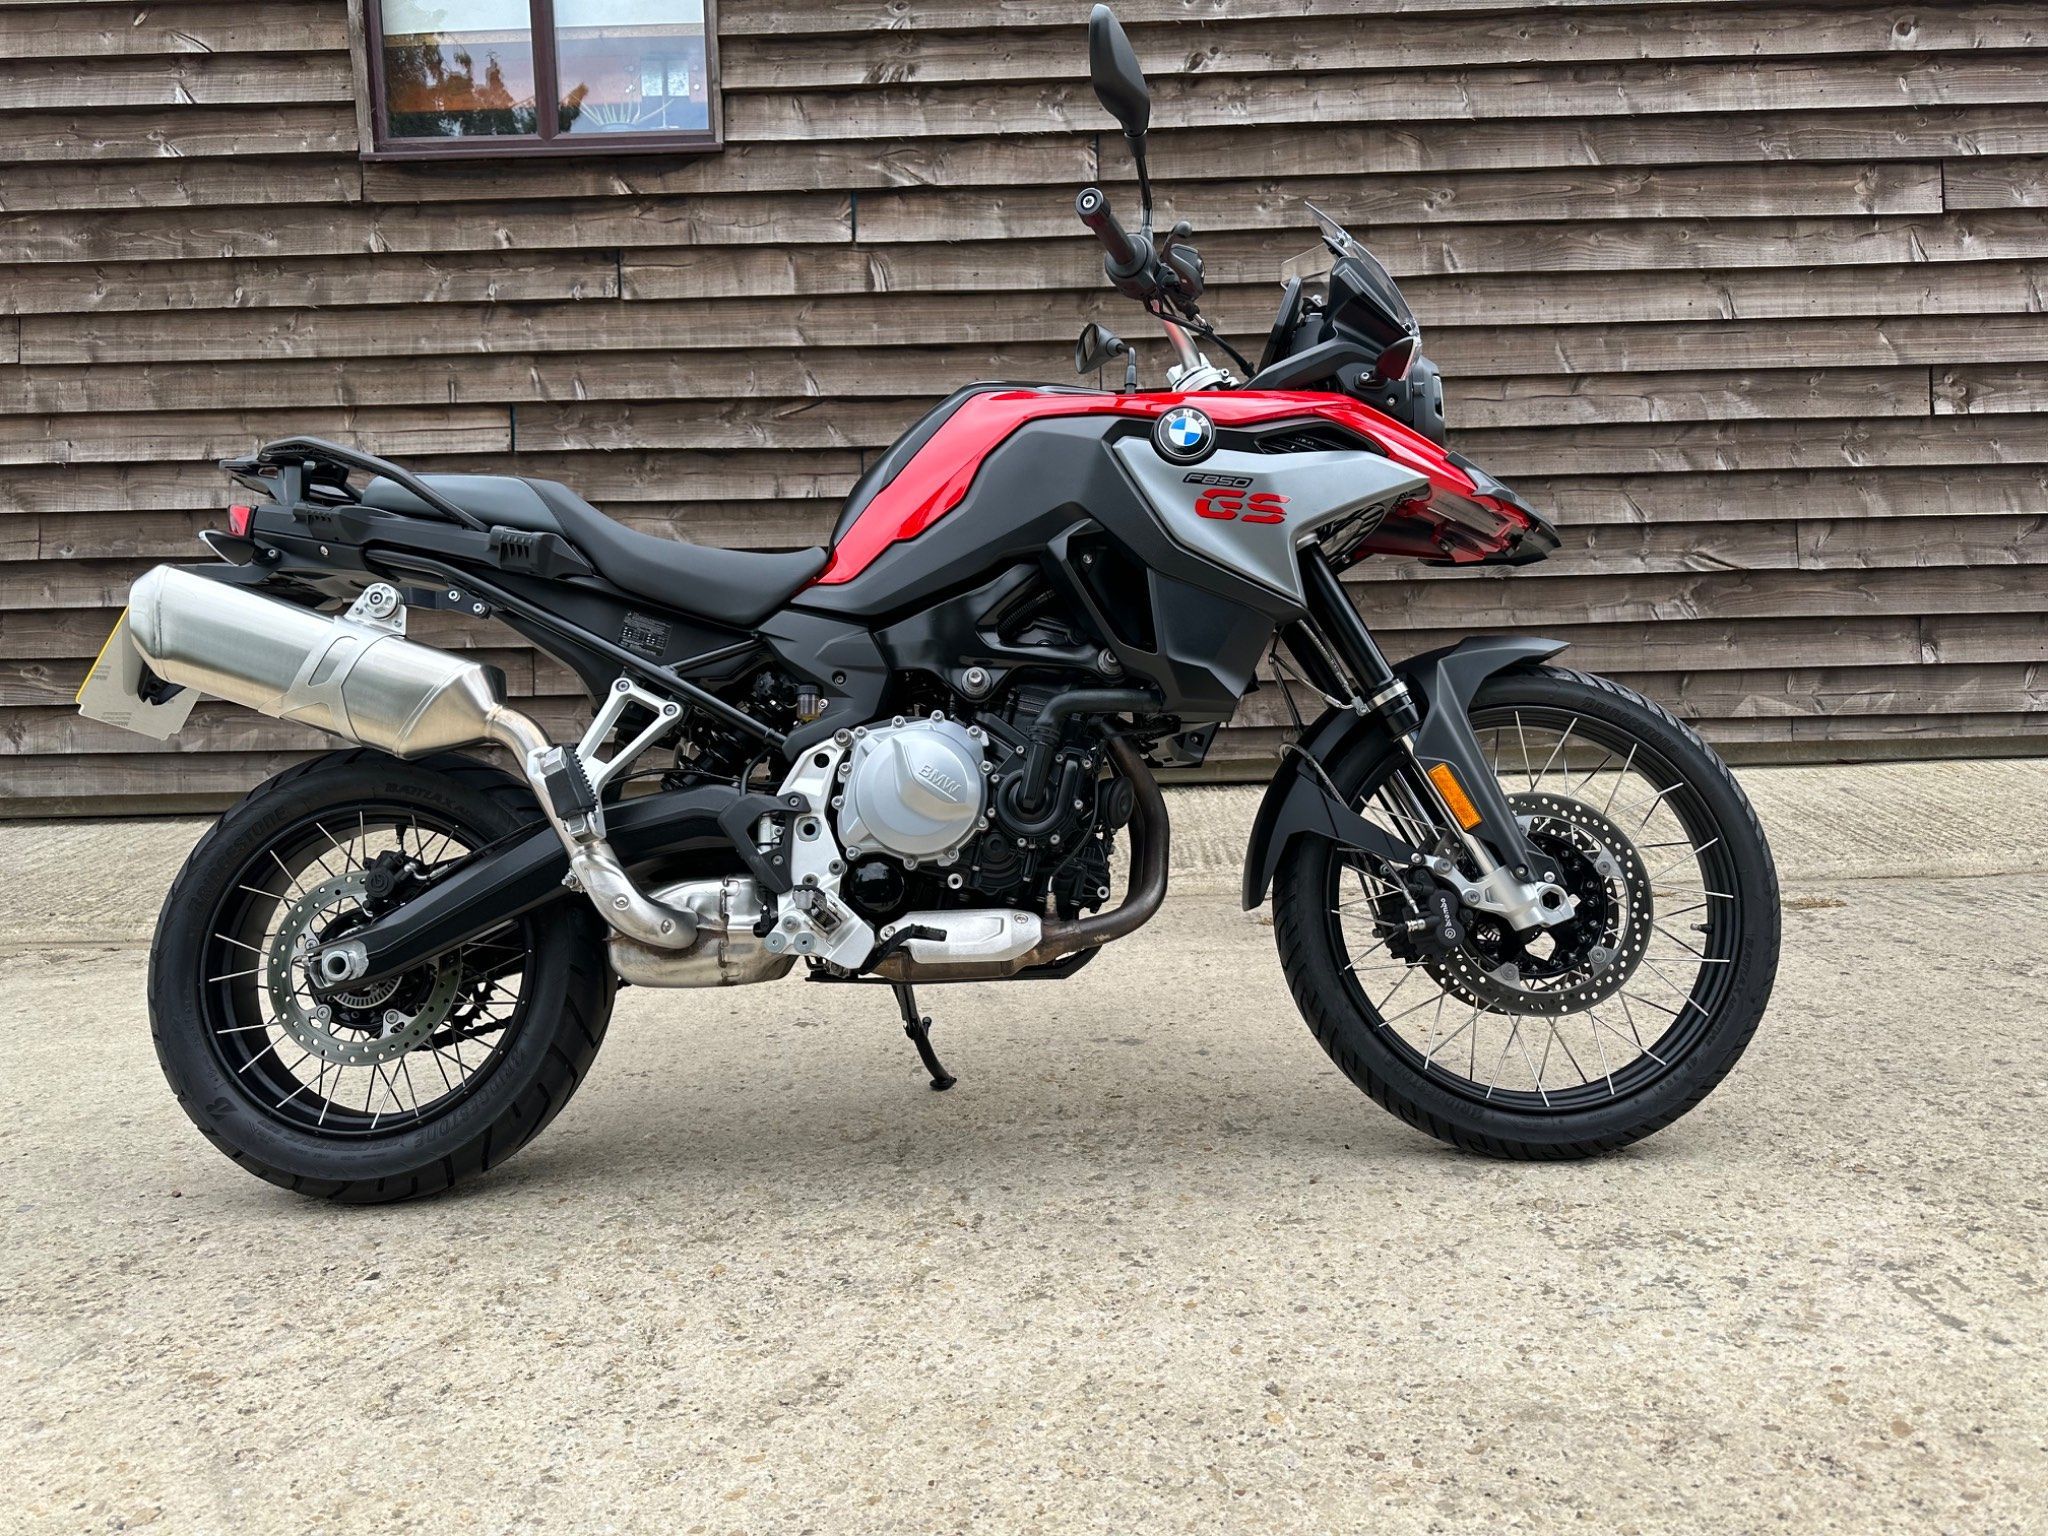 2020 BMW F850GS 850 GS Sport ABS From £108.57 per month 